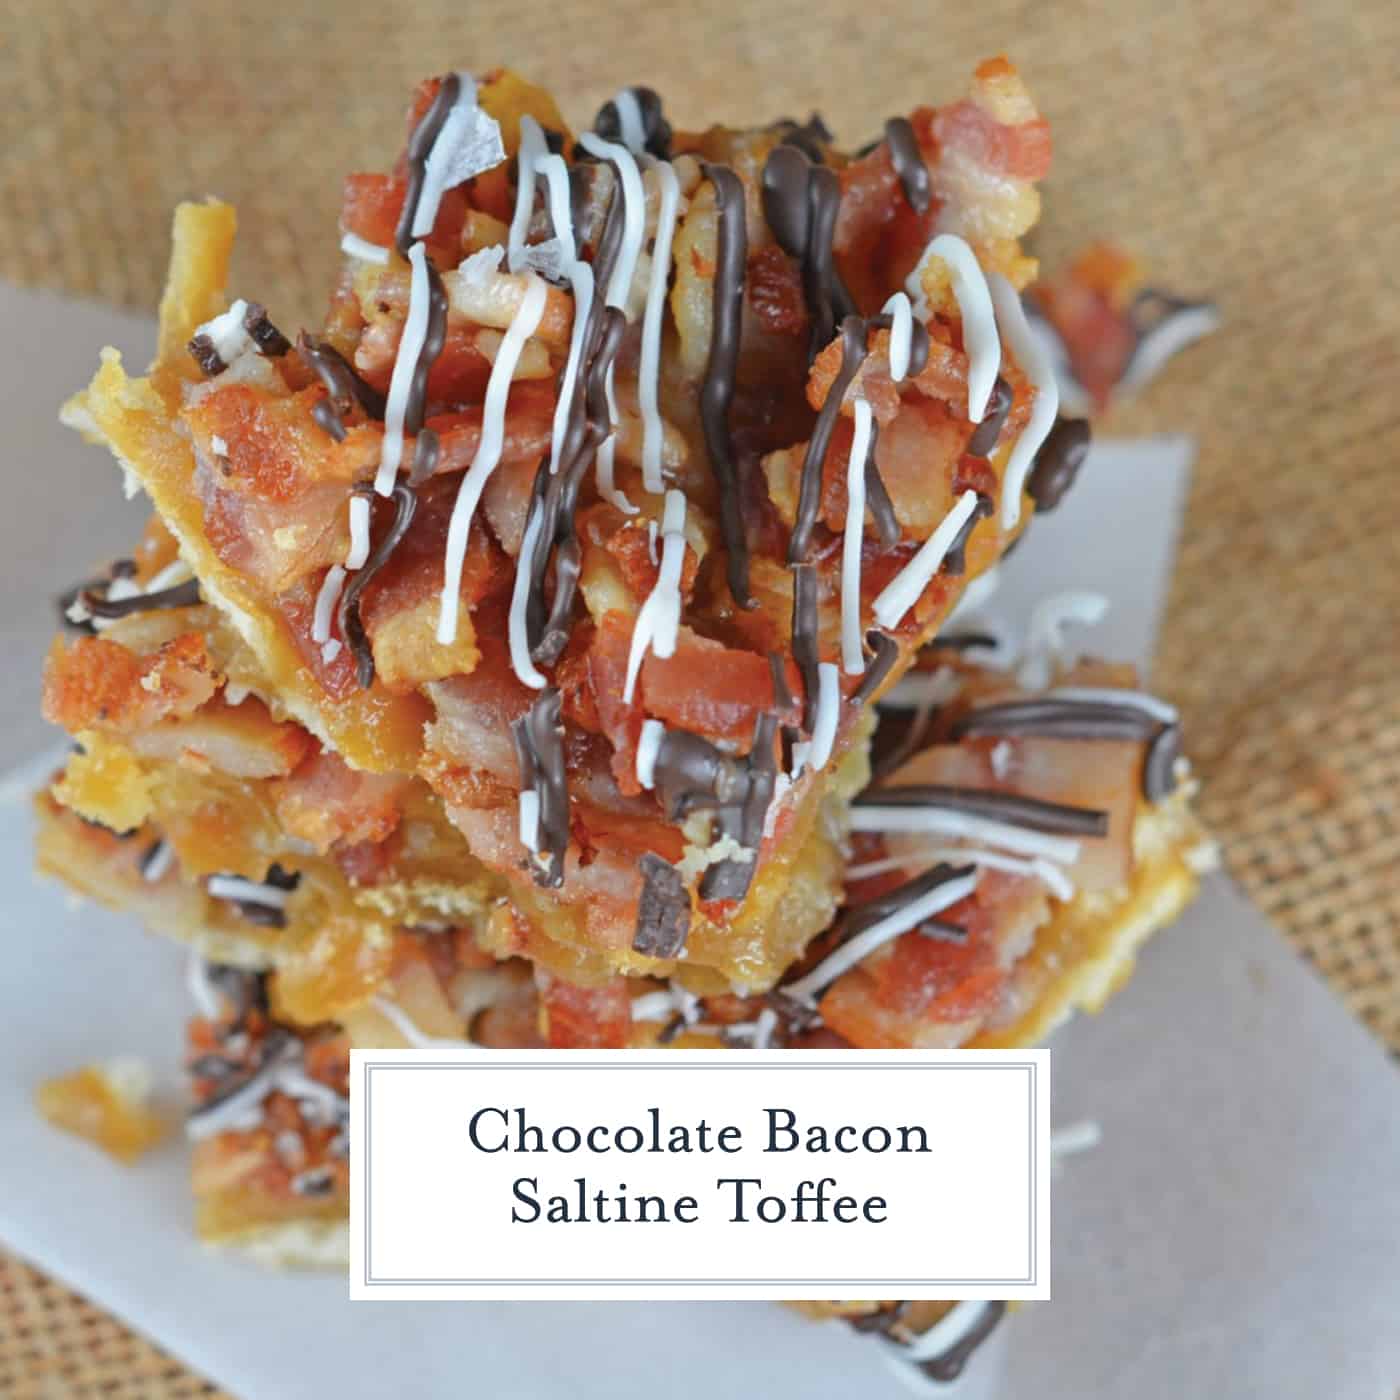 Chocolate Covered Bacon - Order Muddy Pigs Chocolate Bacon Gift